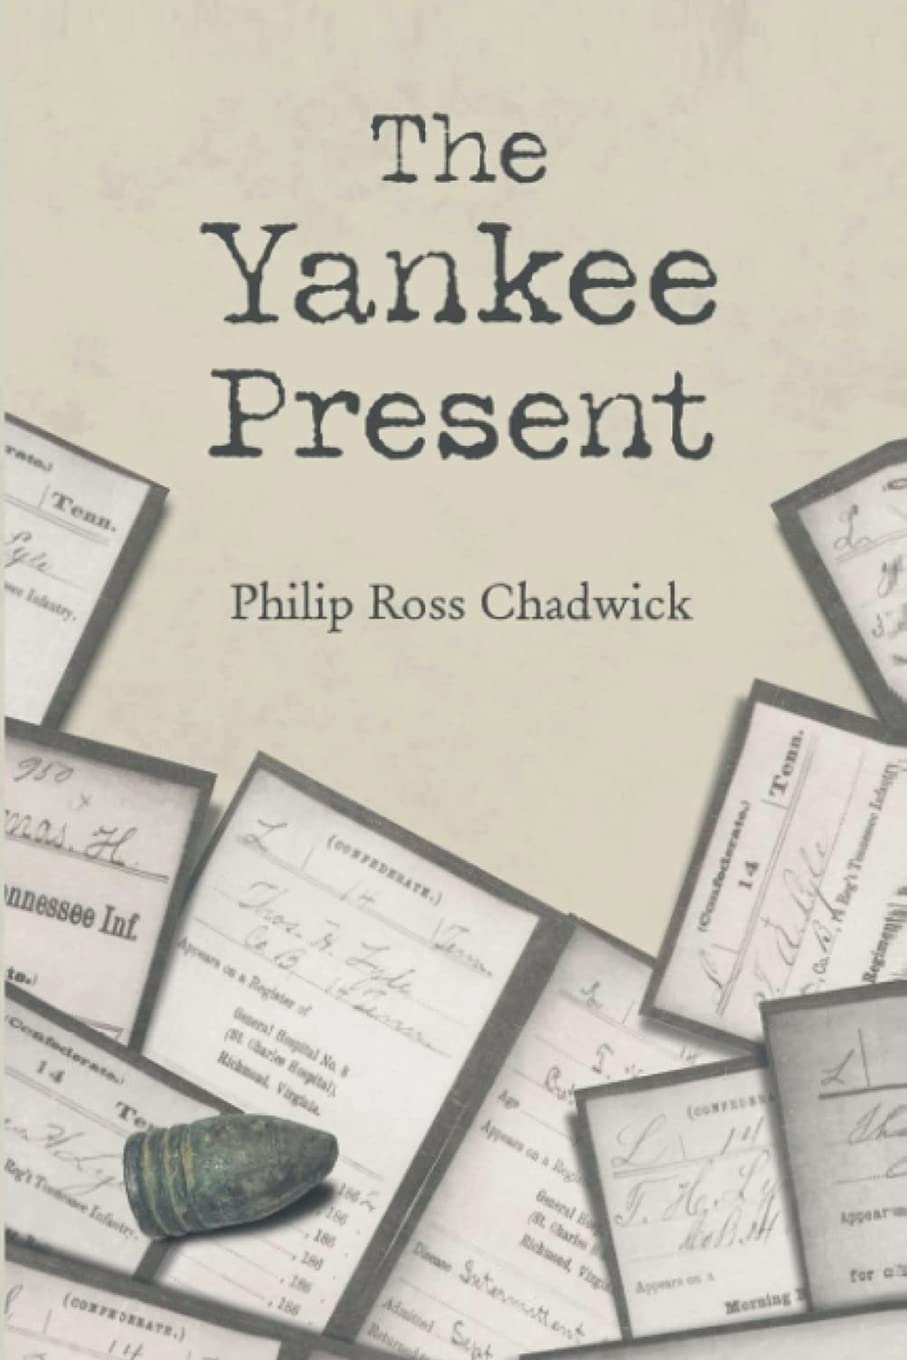 Author's Tranquility Press Publishes The Yankee Present by Philip Ross Chadwick